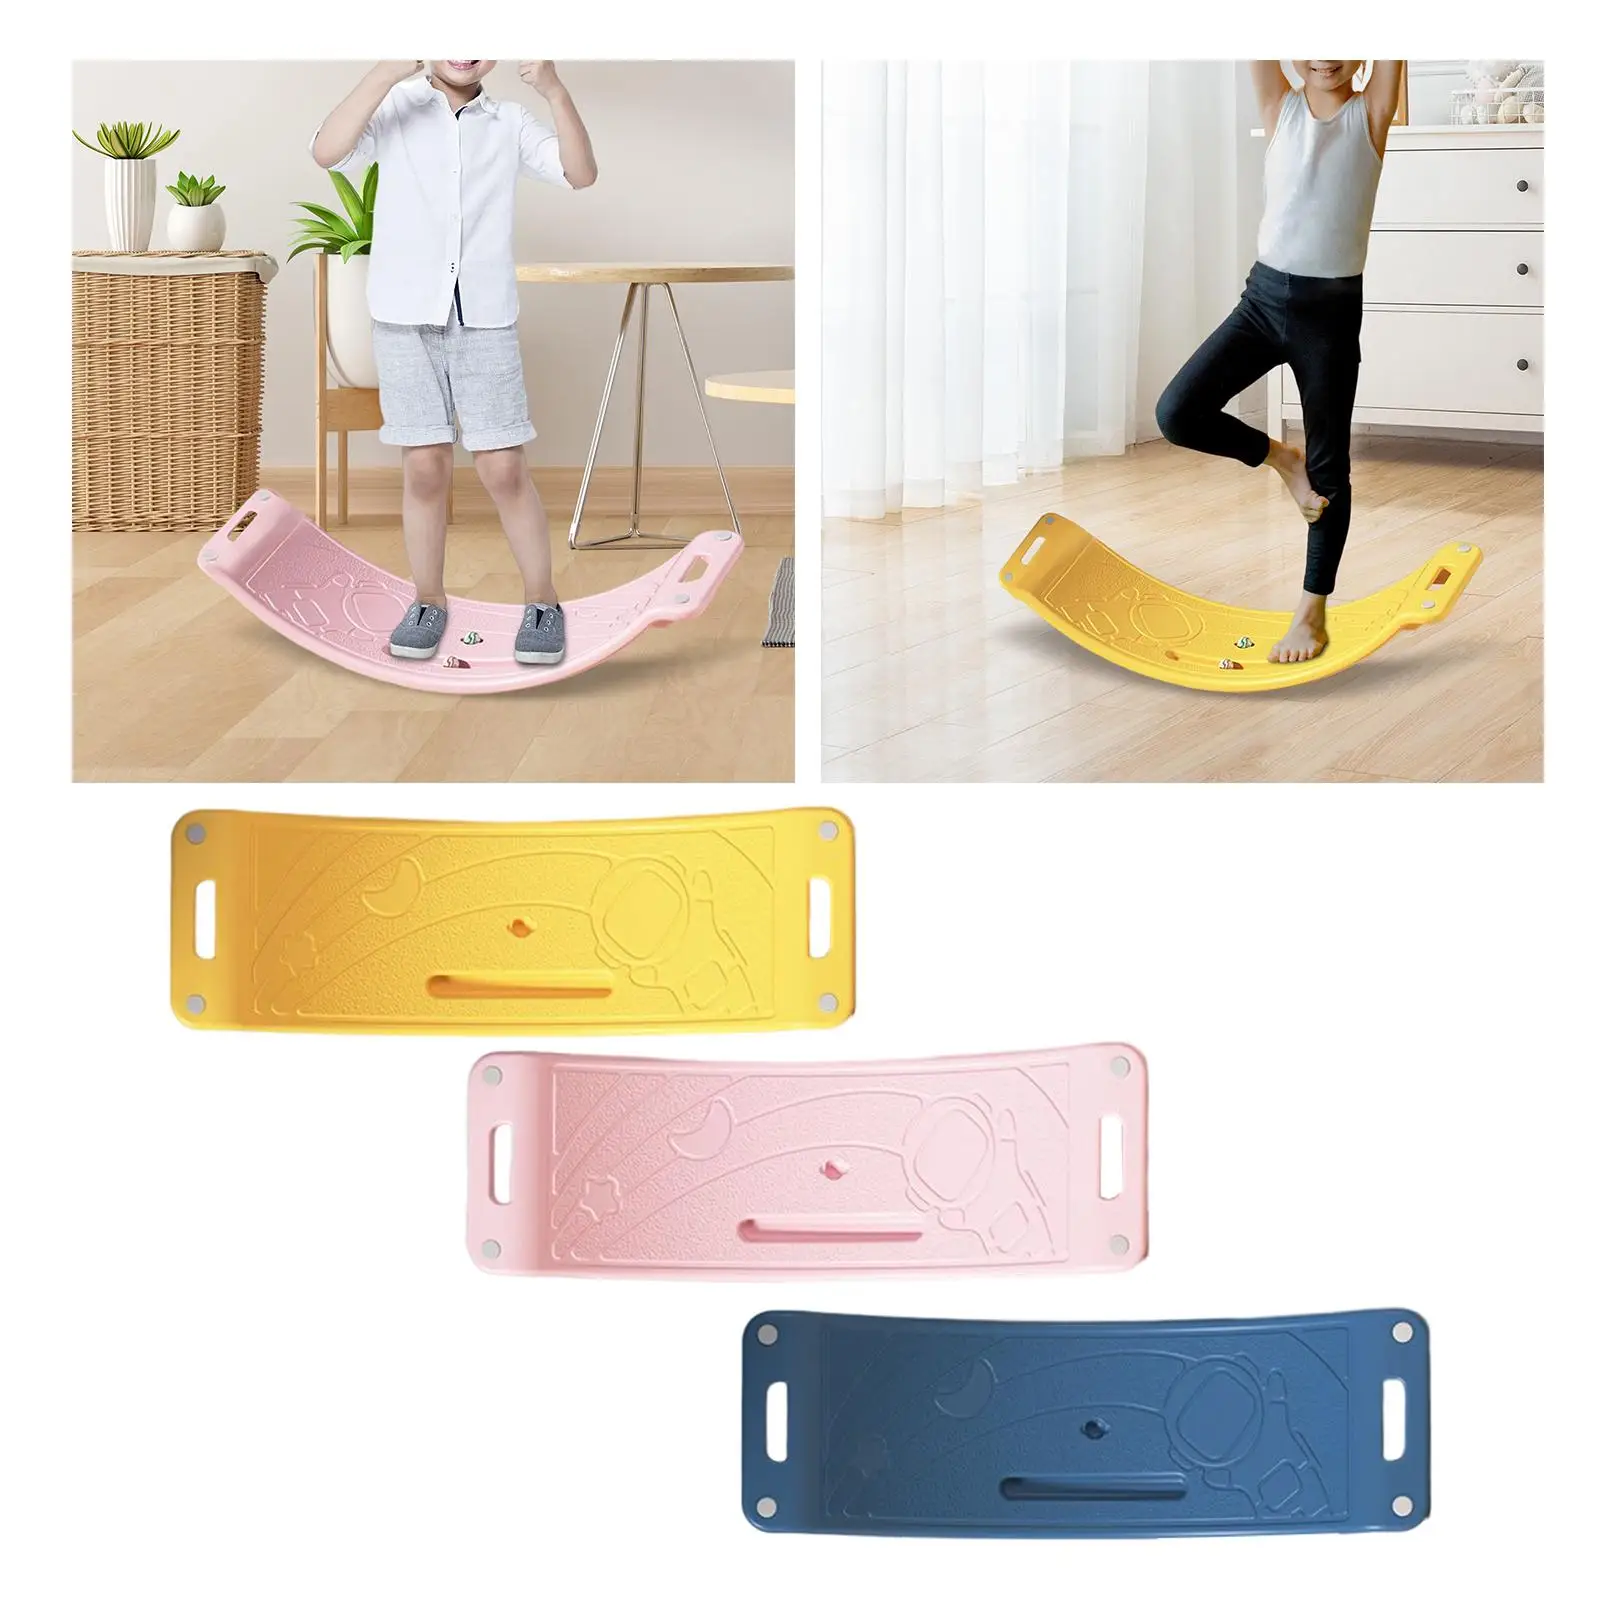 Balance Board with Ball Seesaw Toy Rocker Board for Outdoor Yoga Accessory